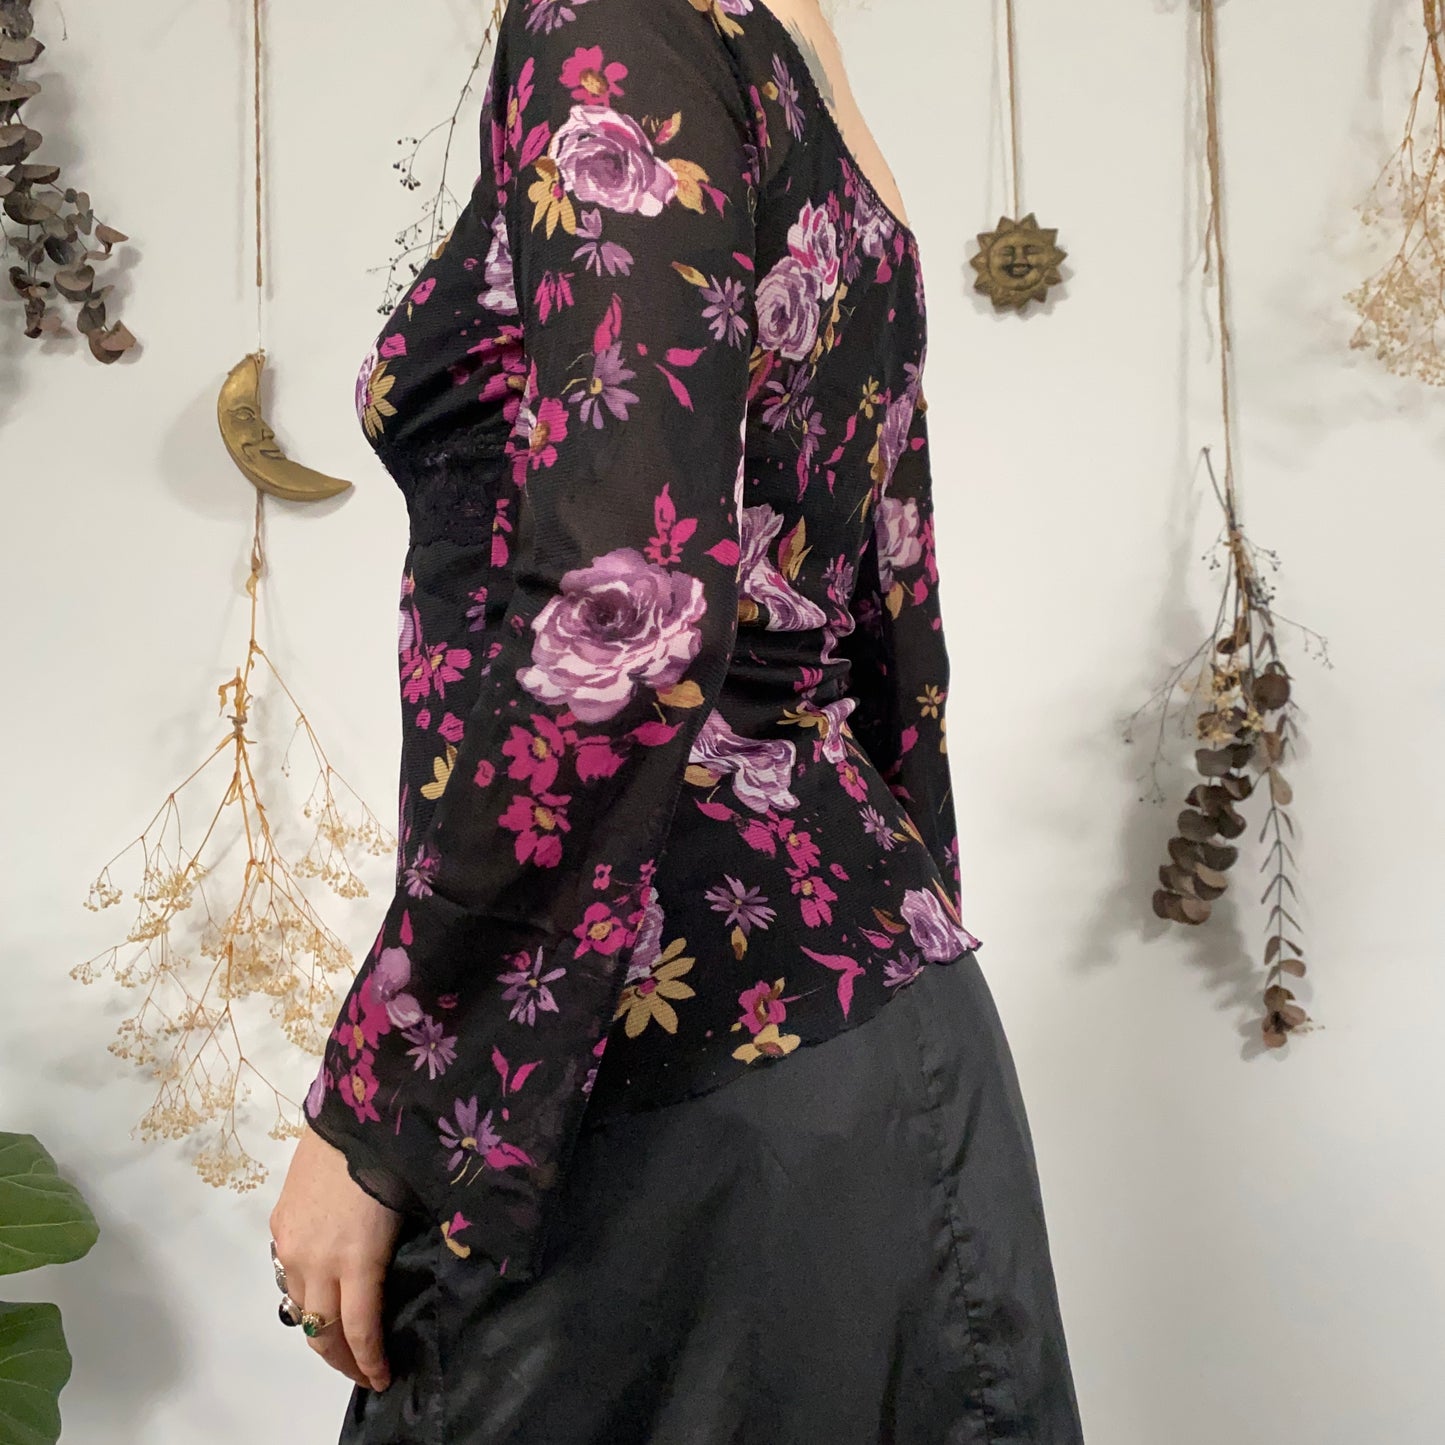 Floral top - size S